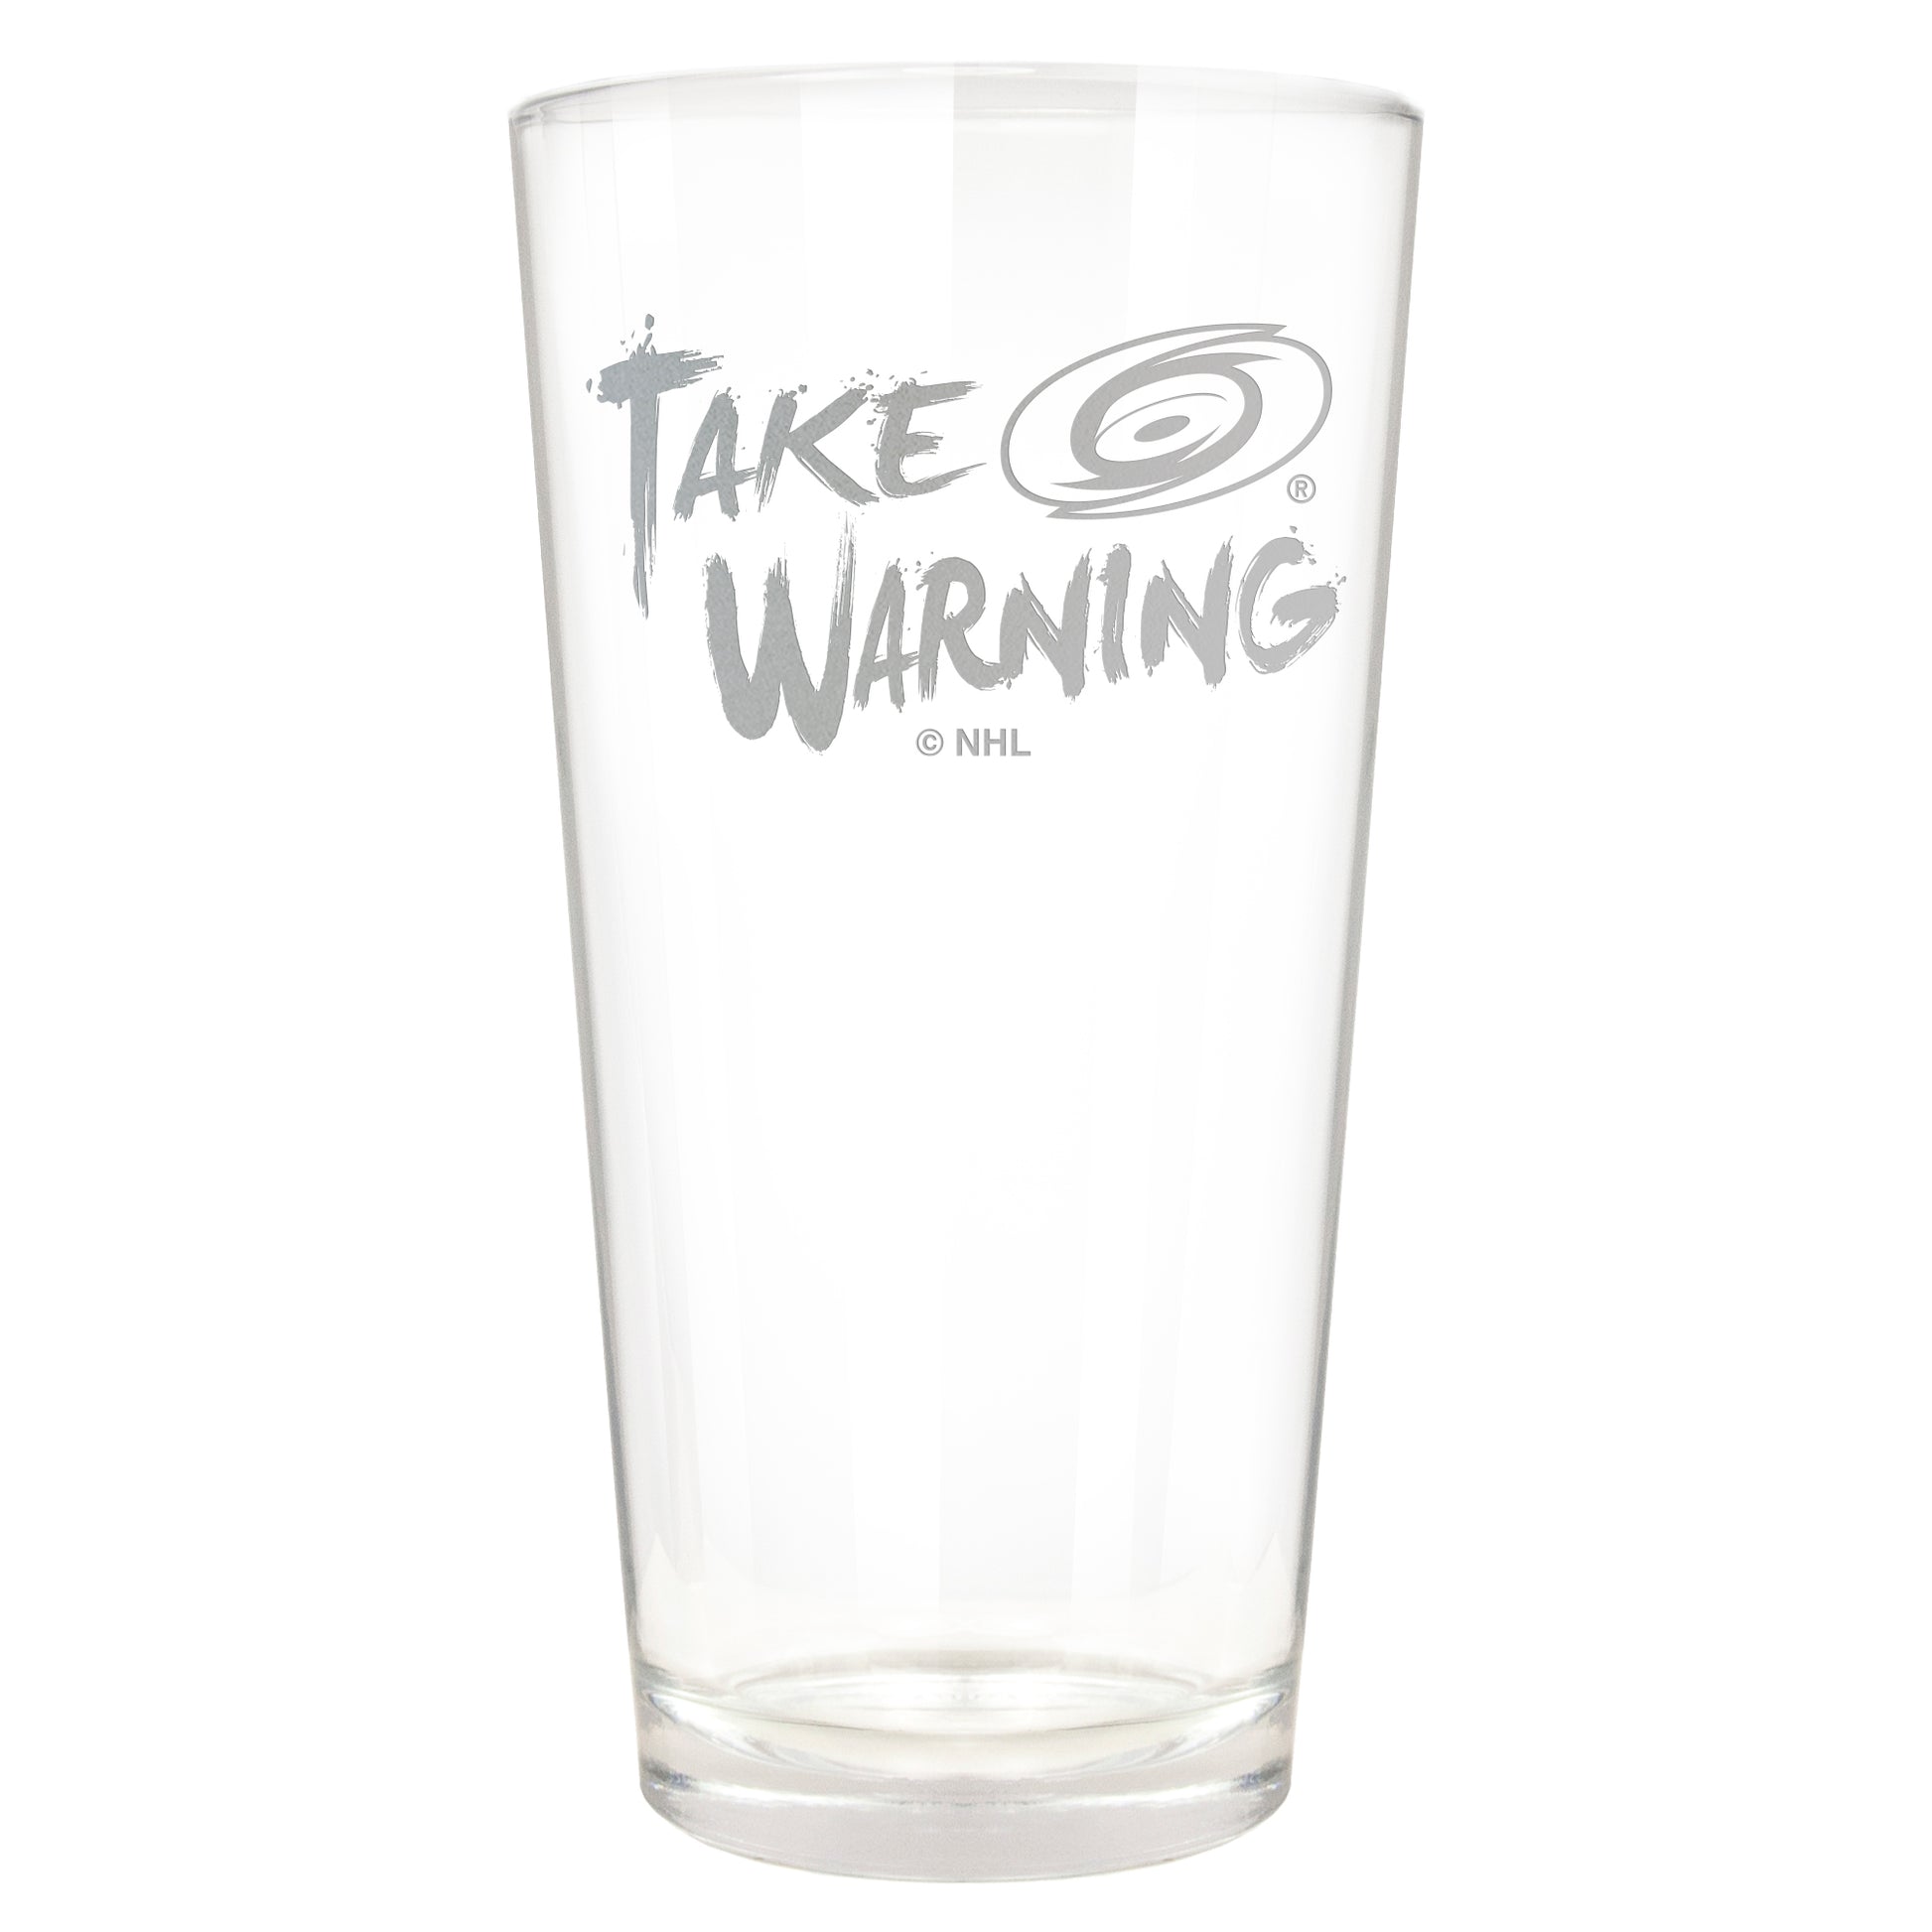 Pint glass that says "Take Warning" with Hurricanes logo